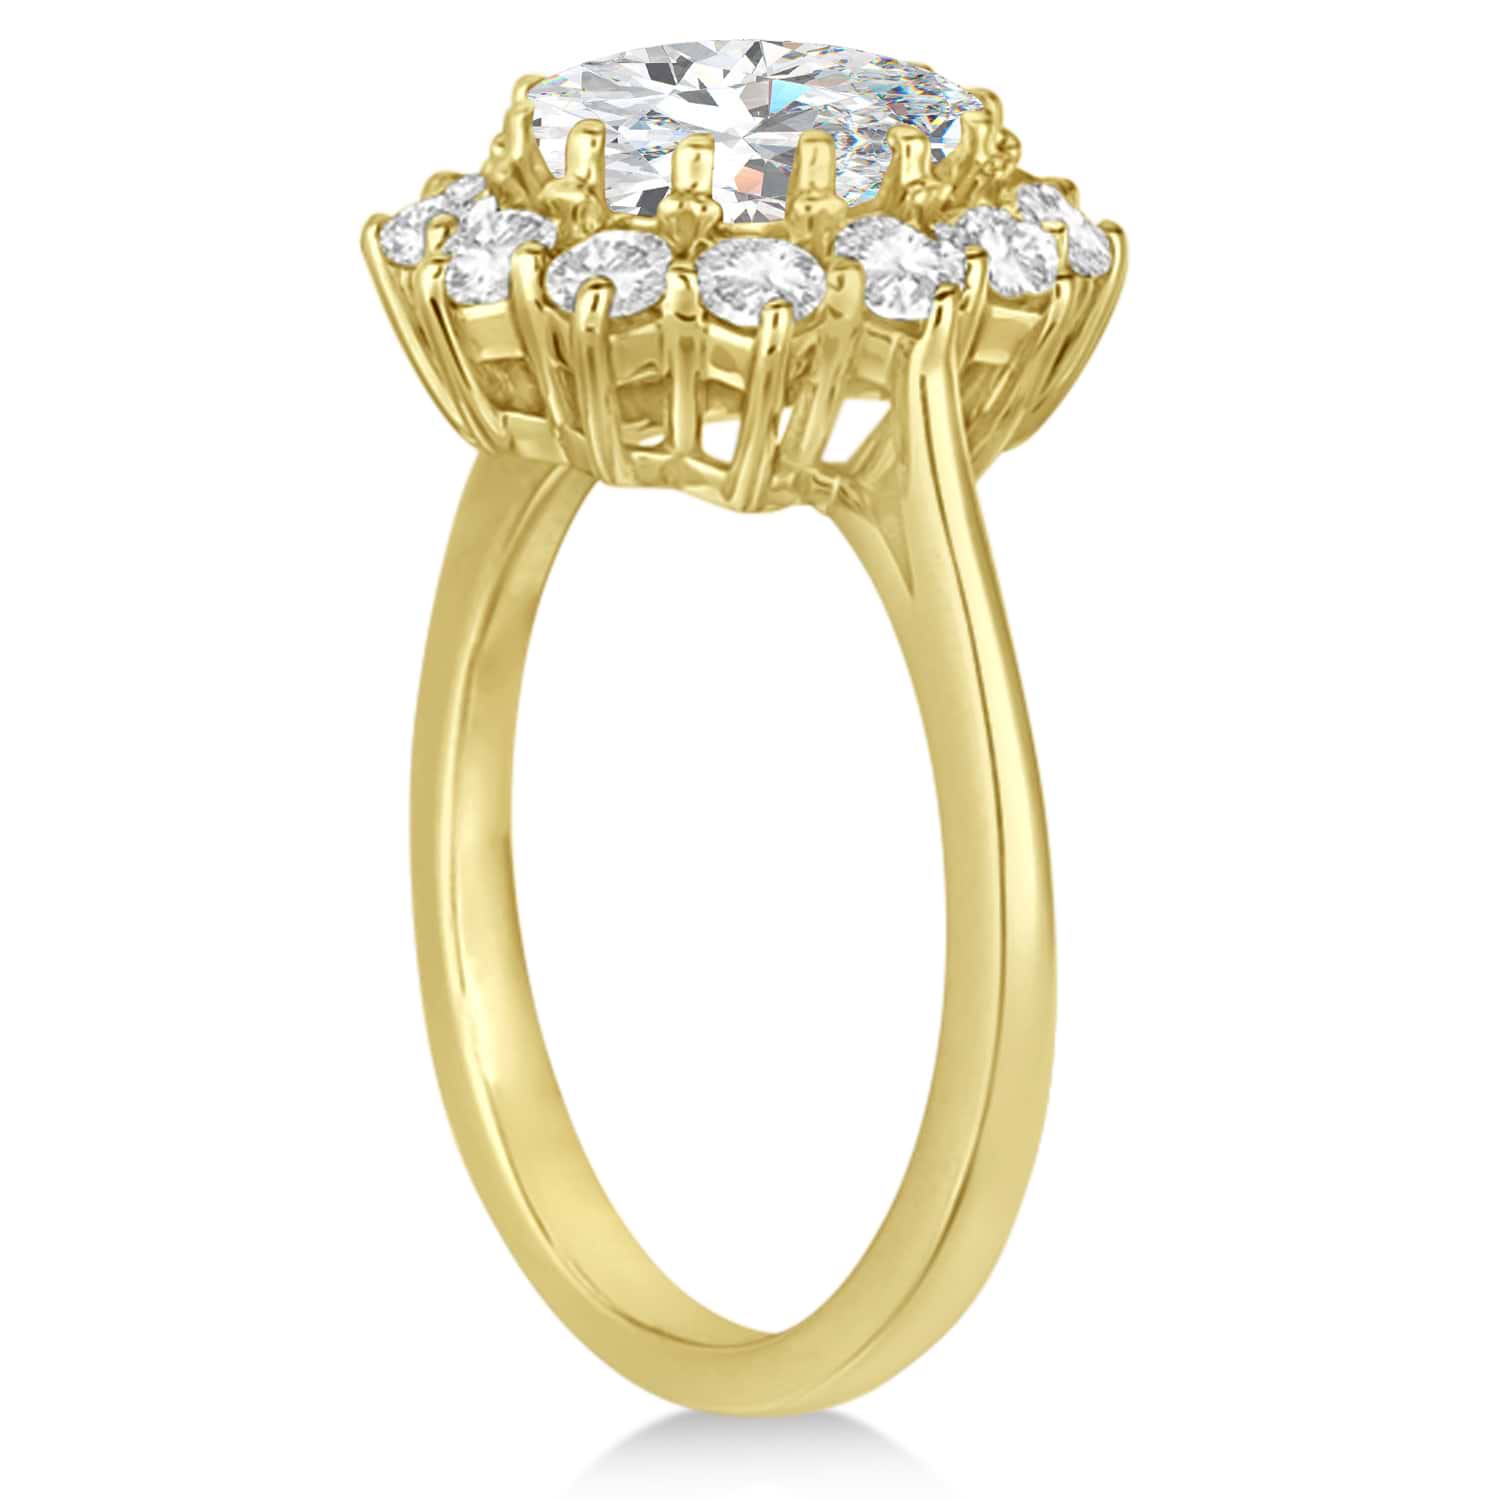 Oval Moissanite and Diamond Ring 14k Yellow Gold (3.60ctw)